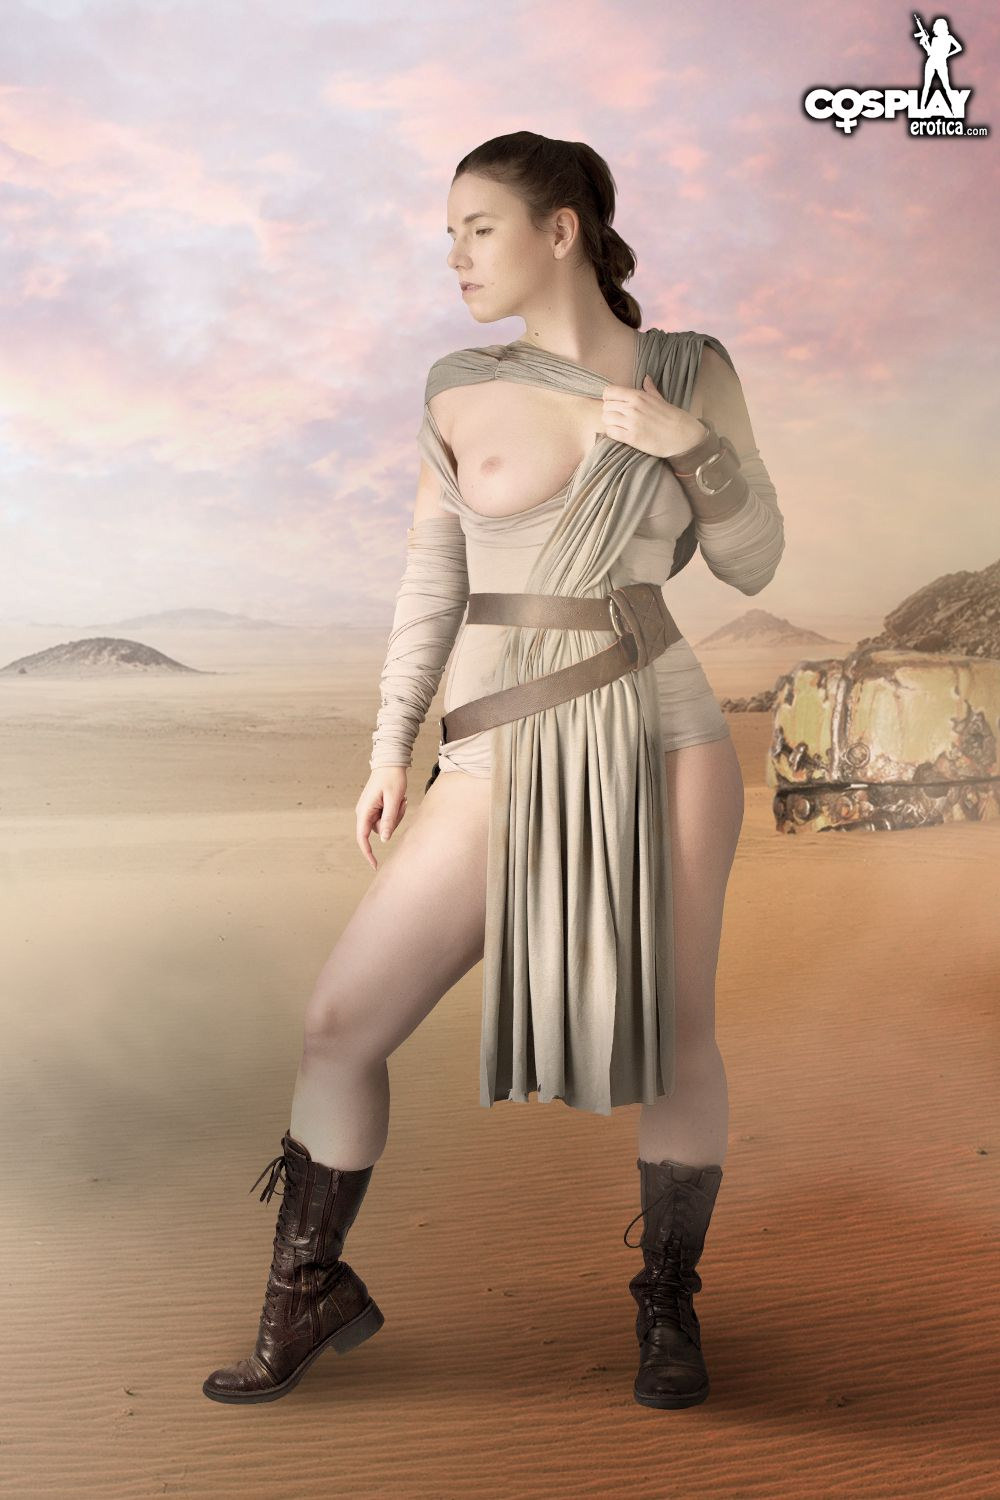 Cassie - Galactic Empire shows free gallery picture 25-0025